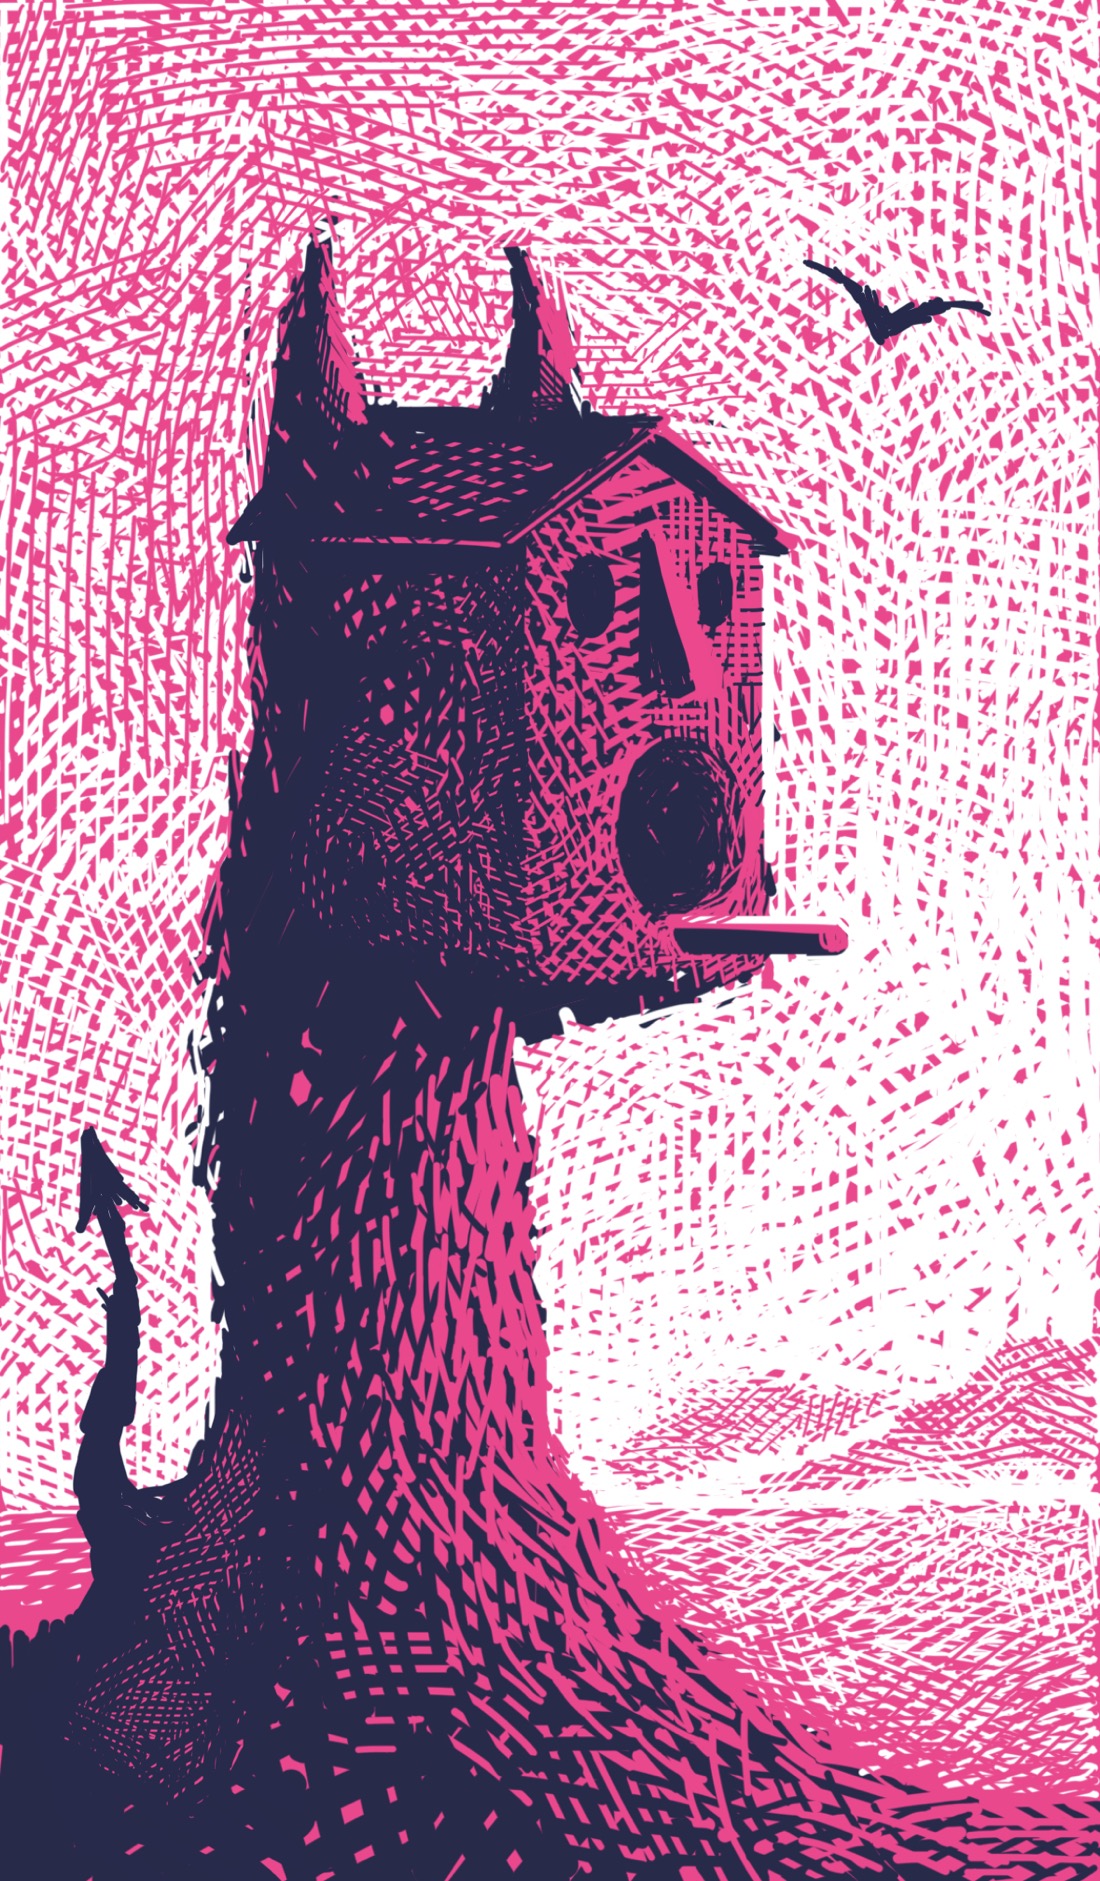 The stump of a thick tree, with a birdhouse mounted at the top of it. The front of the birdhouse looks like a face: the circular entrance is the mouth, with a nose and two round holes placed above it. The birdhouse also has two devil horns and, behind the stump at the base of it, something sticking up from the ground that looks a lot like a pointed tail. In the background is a flat plain, with mountains in the distance. A bird is flying off in the sky.